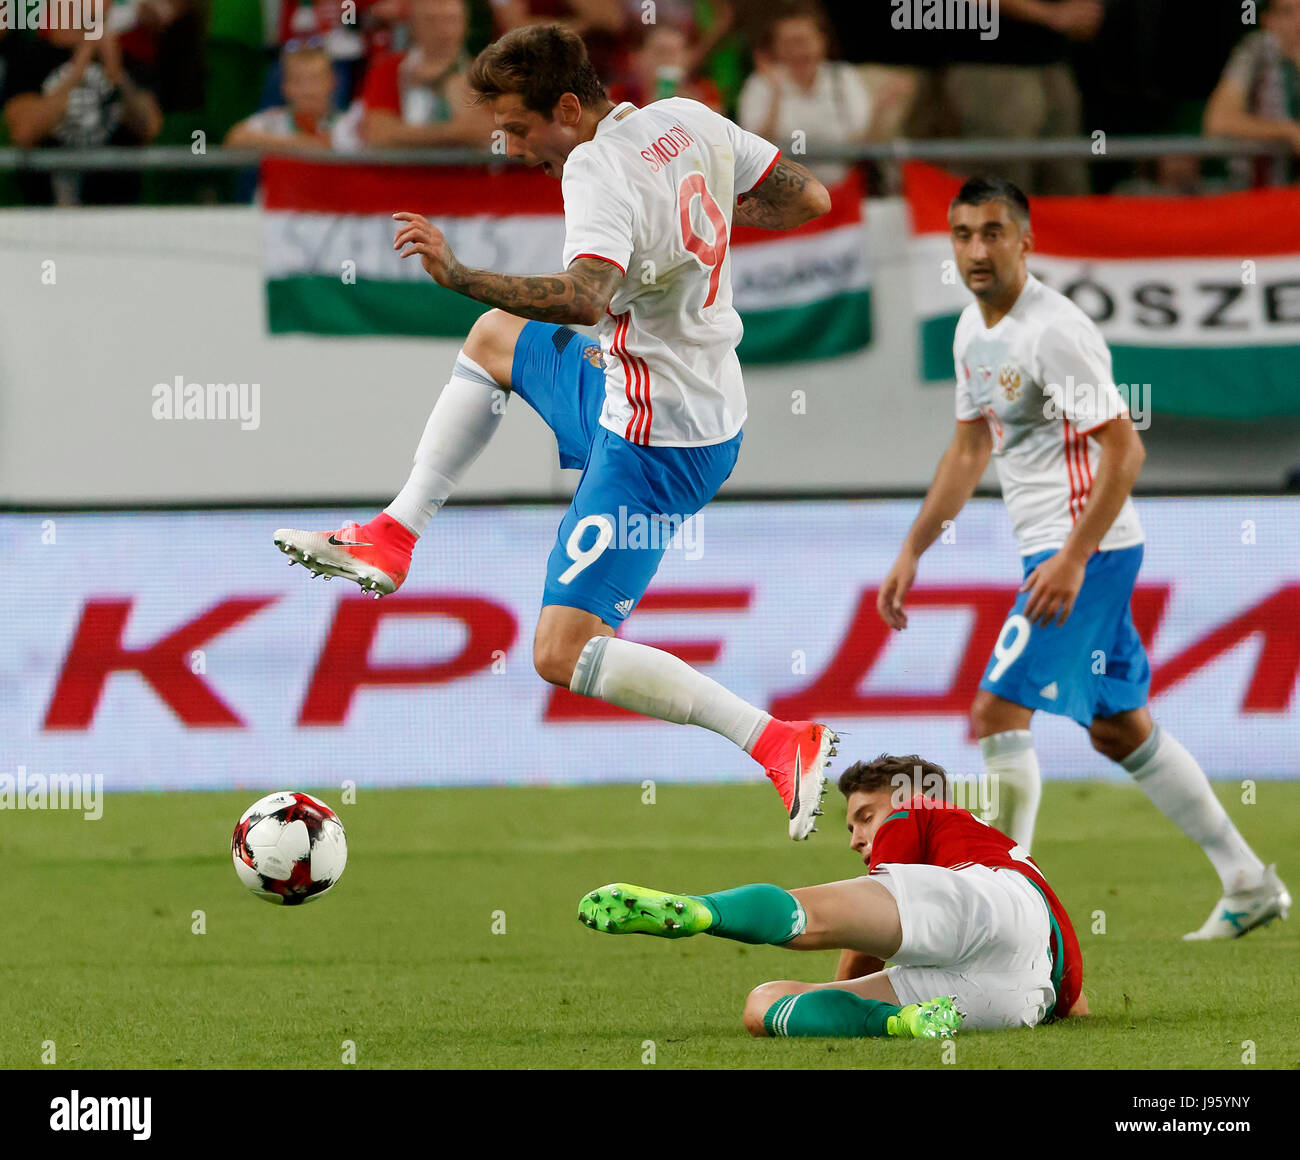 Budapest, Hungary. 05th June, 2017. BUDAPEST, HUNGARY - JUNE 5: Roland Sallai (L2) of Hungary slide tackles Fedor Smolov #9 of Russia in front of Aleksandr Samedov (R) of Russia during the International Friendly match between Hungary and Russia at Groupama Arena on June 5, 2017 in Budapest, Hungary. Credit: Laszlo Szirtesi/Alamy Live News Stock Photo